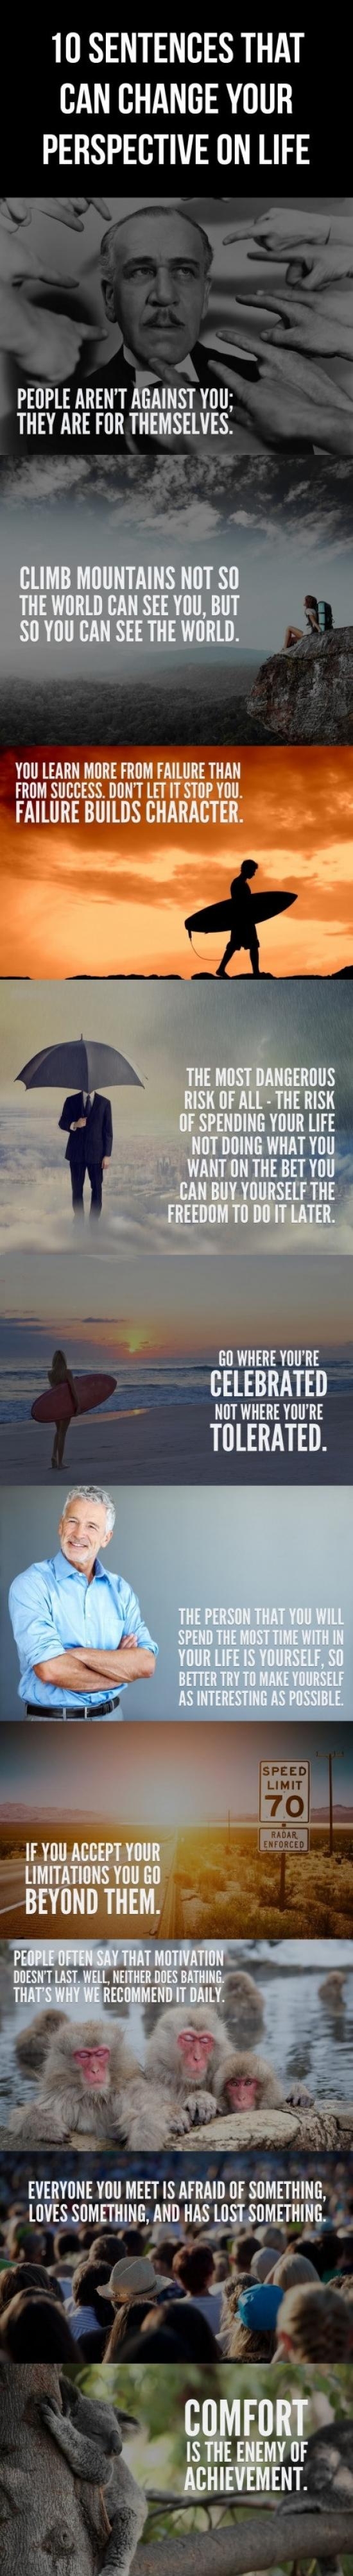 10 sentences that can change your perspective on life.